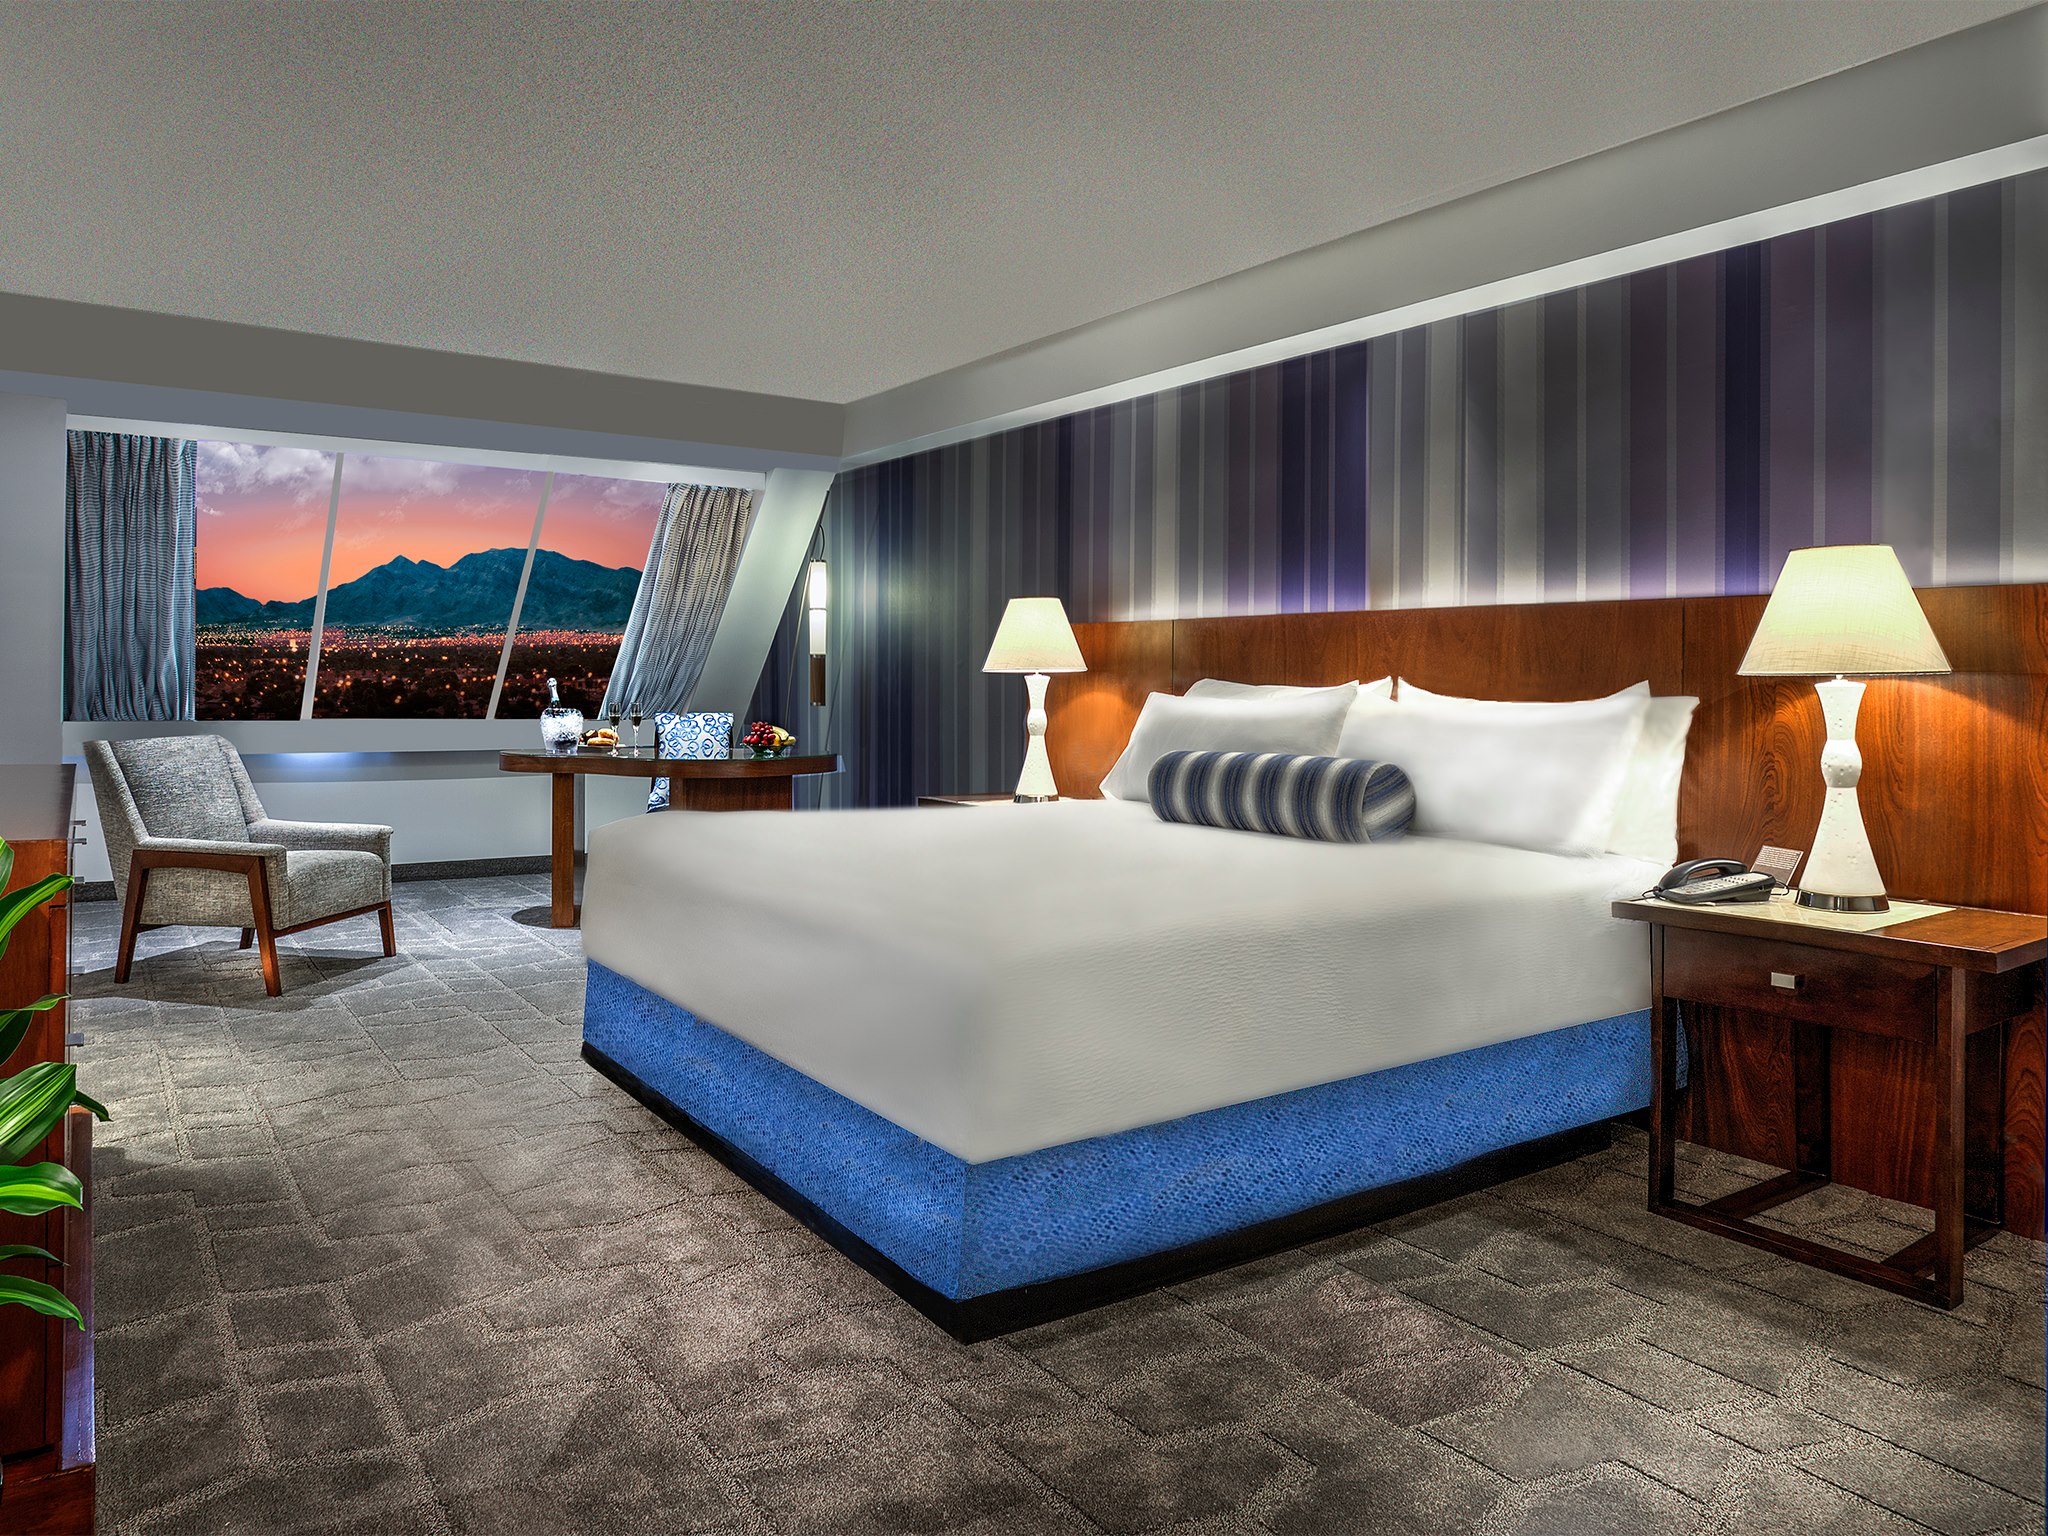 Luxor hotel room remodel stays with Egyptian theme